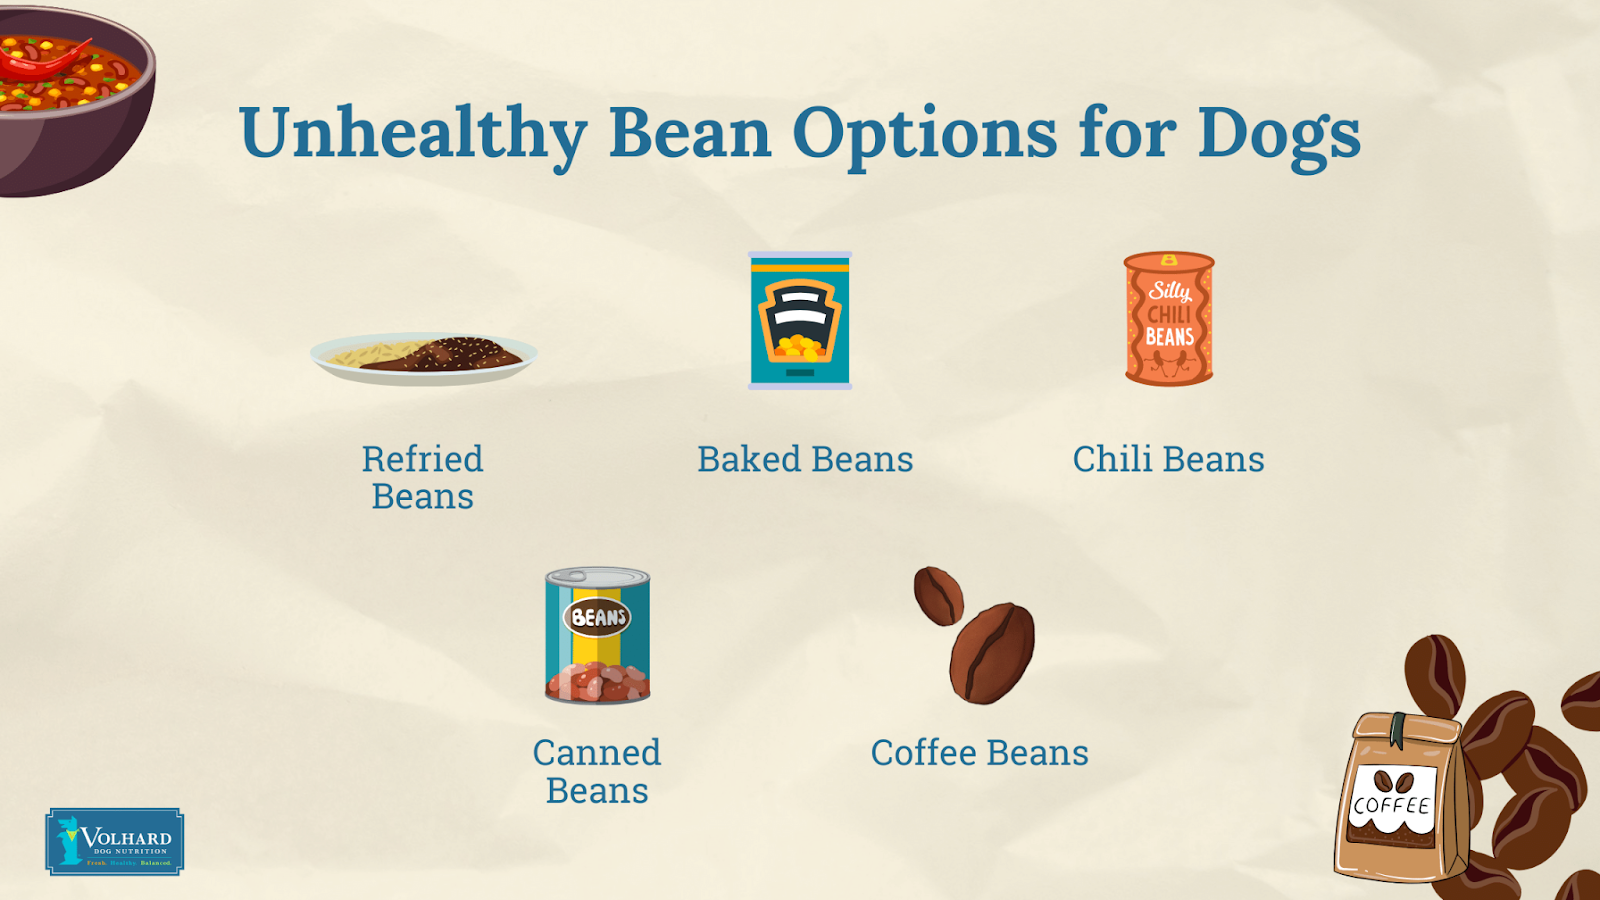 Unhealthy bean options for dogs